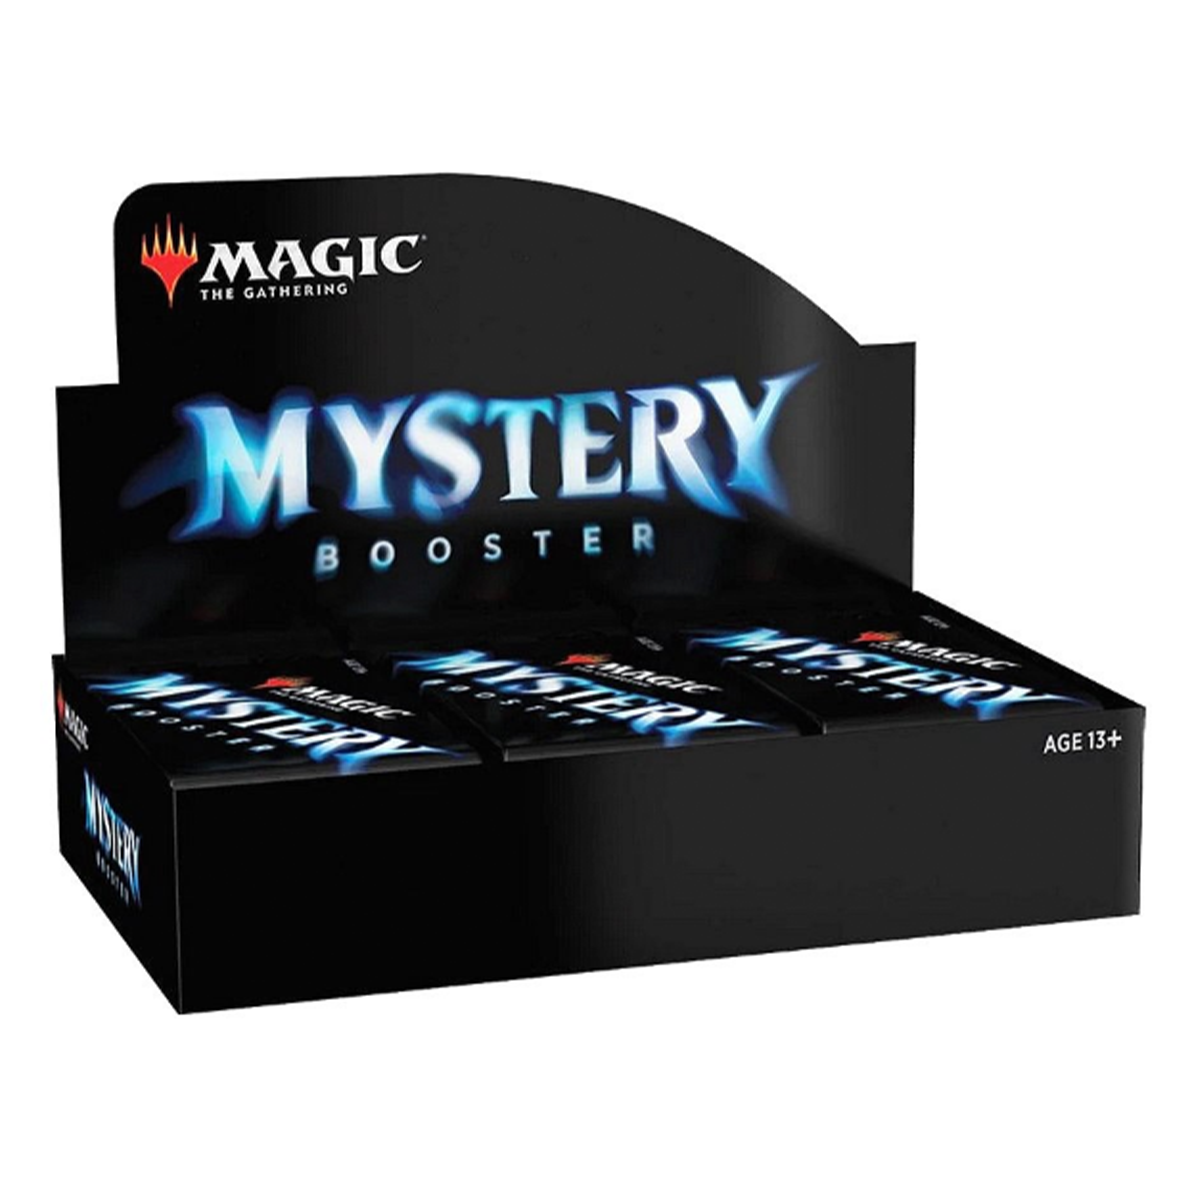 Magic the Gathering: Mystery Booster Box - Convention Edition